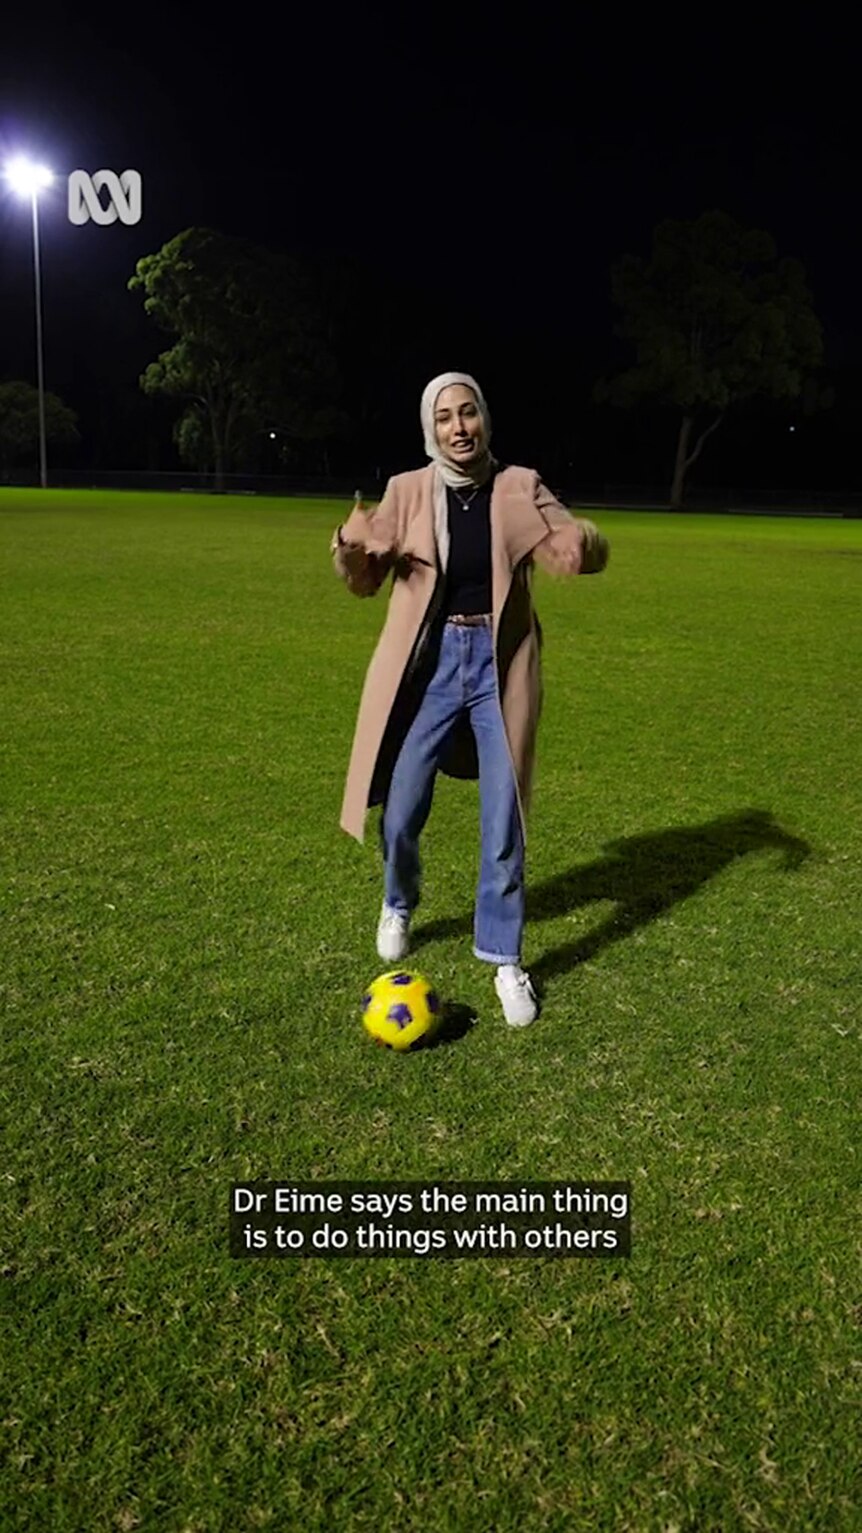 A young woman with medium-tone skin in a hijab and jeans stands with a soccer ball on grass at night